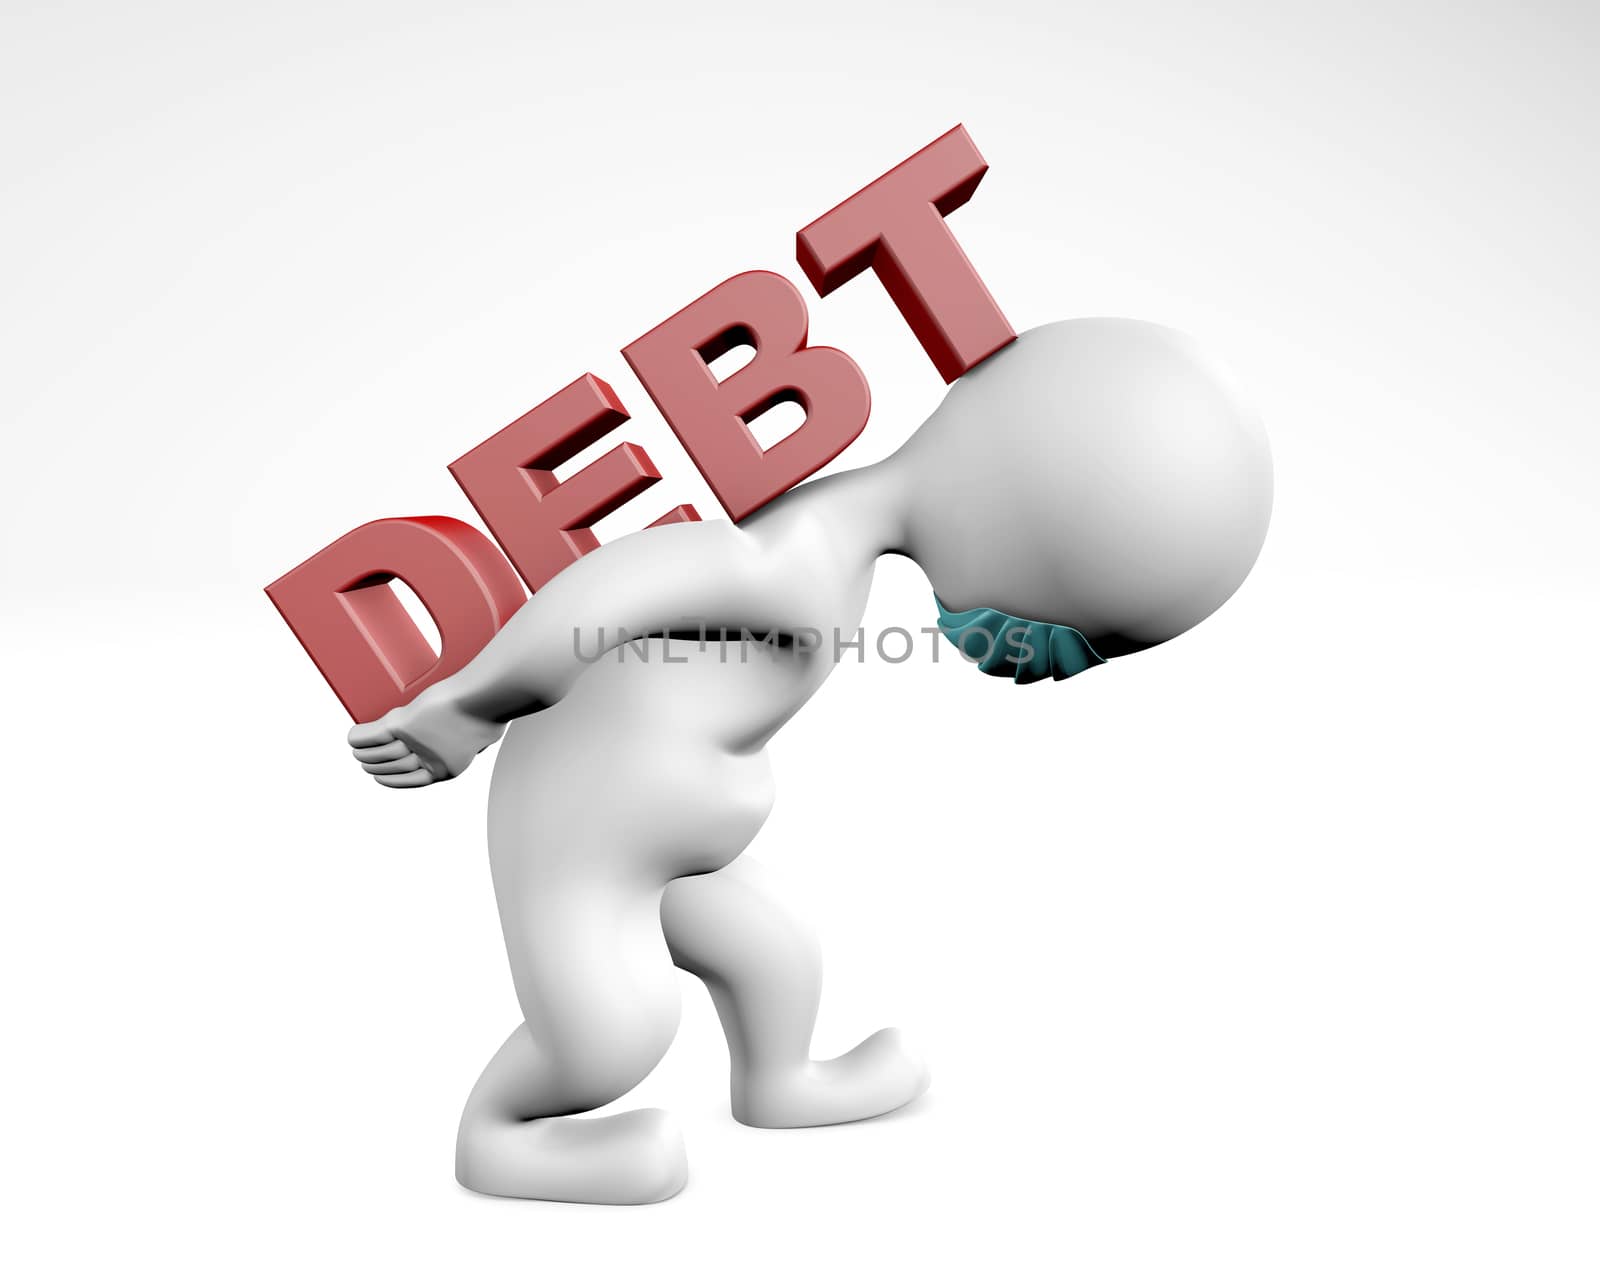 Man with mask holding burden of debt 3d rendering by F1b0nacci